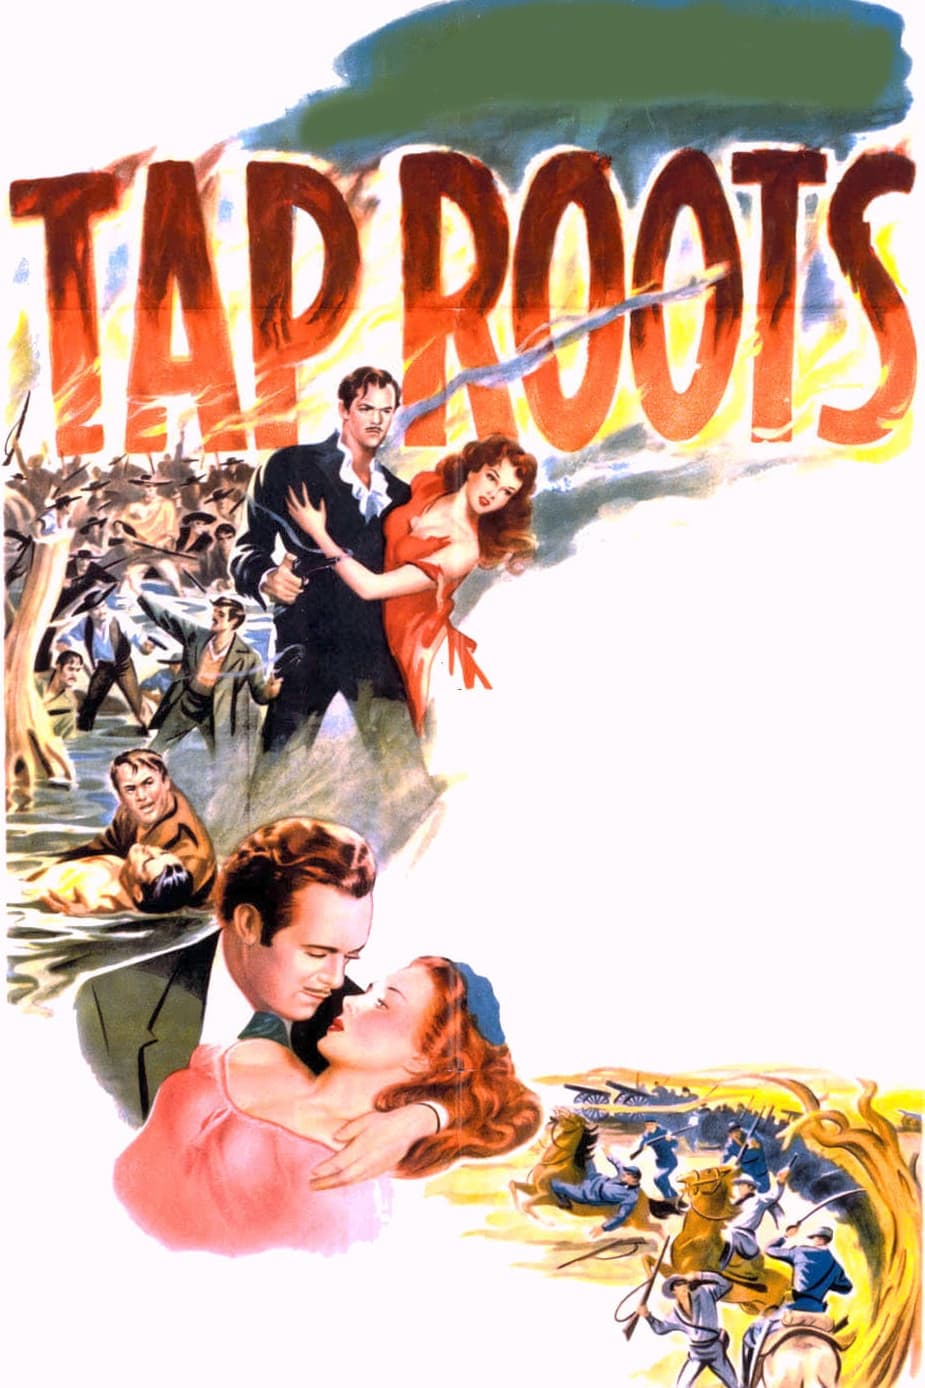 Tap Roots (1948)